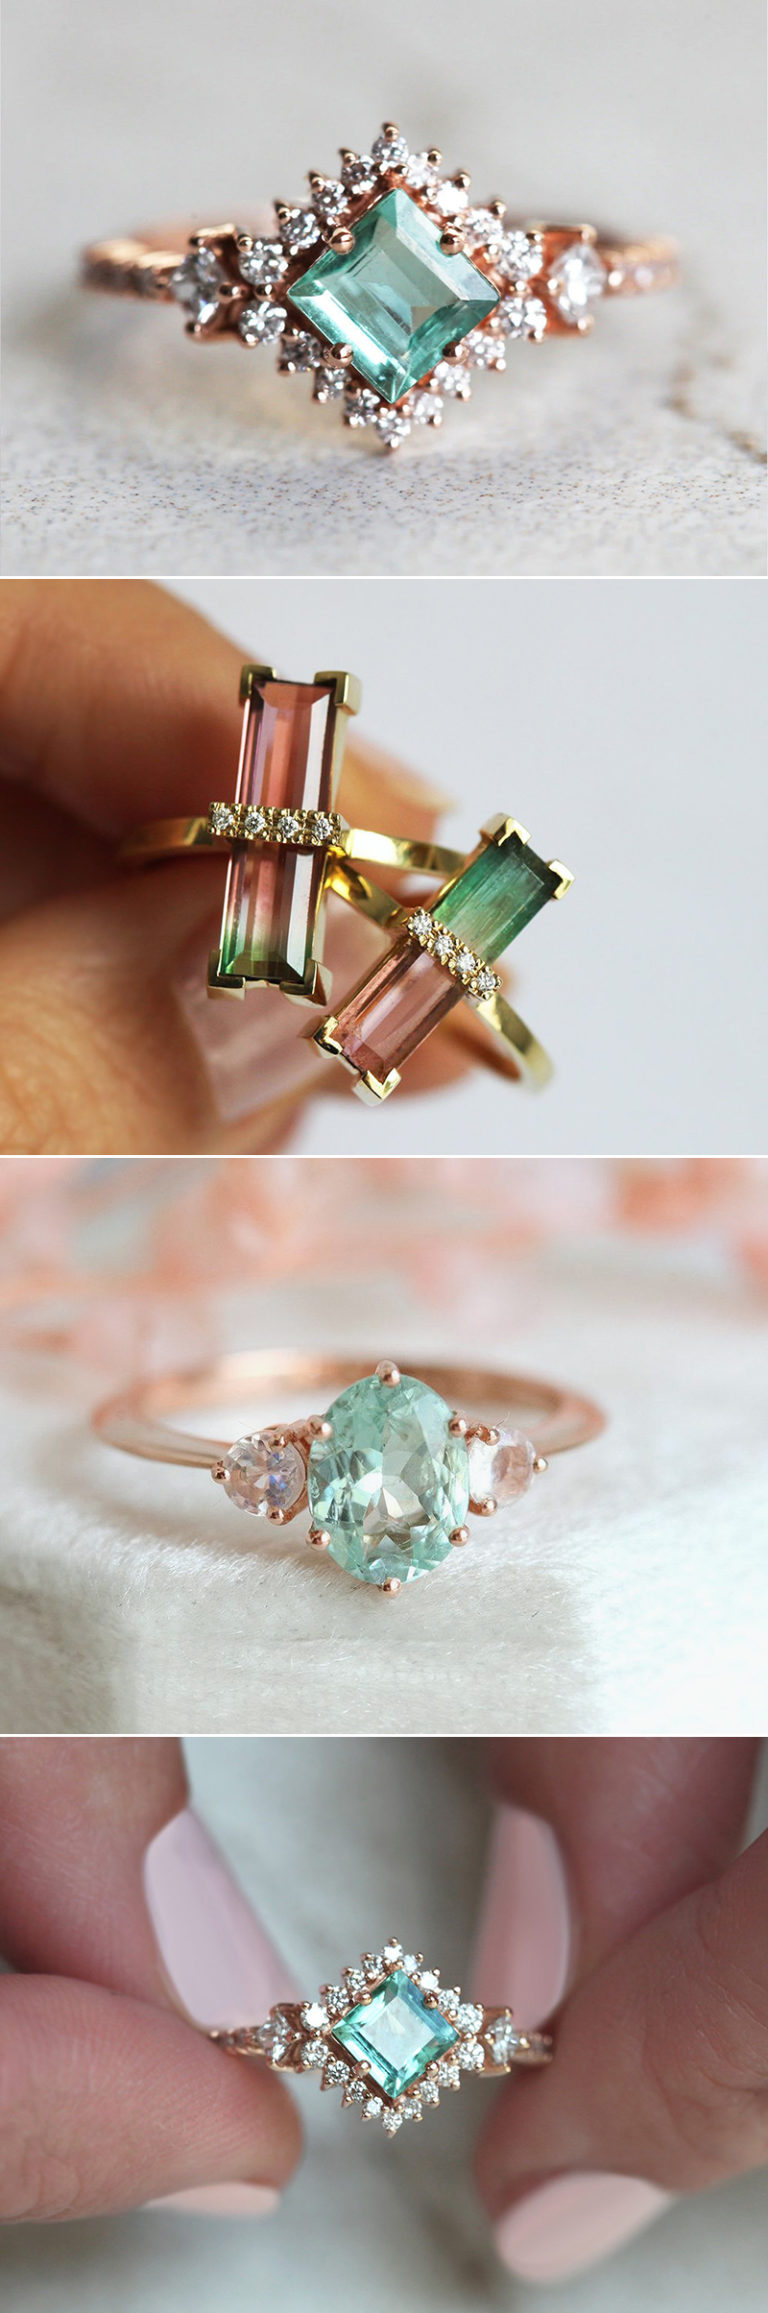 Why Colored Stone Engagement Rings Are Crazy Popular? 6 Gemstone Trends